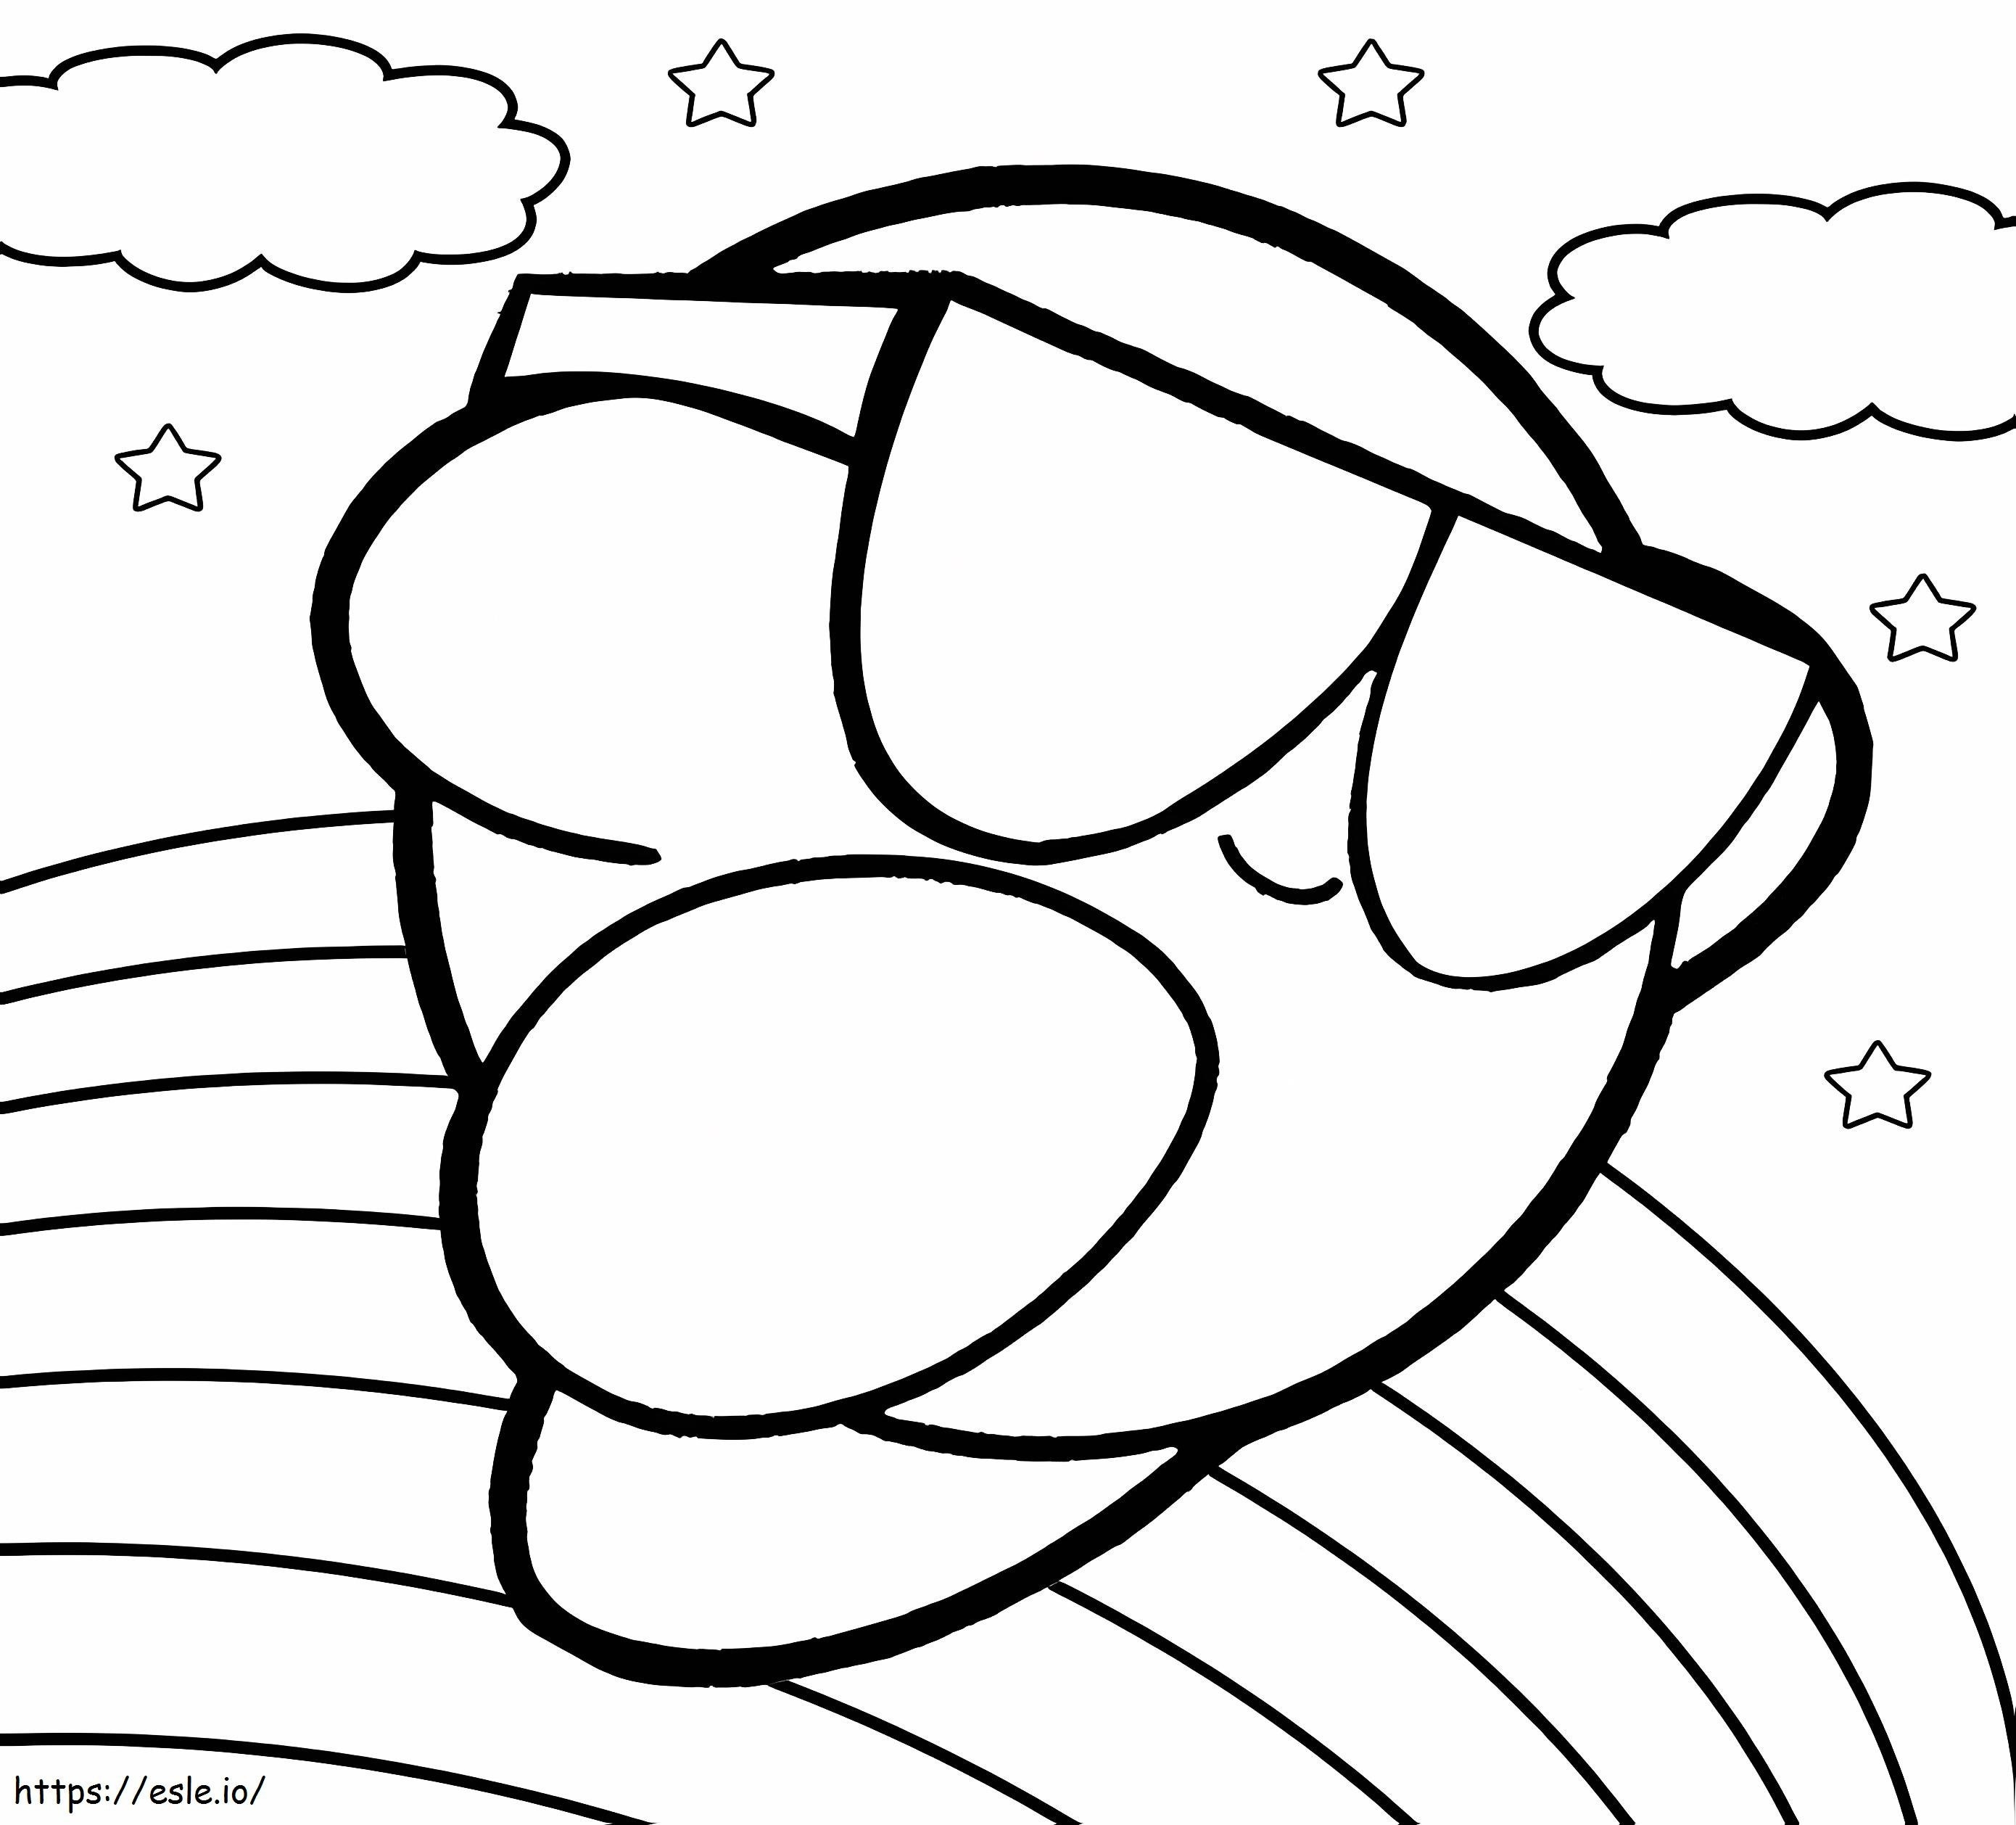 1528855562 Coolkirbya4 coloring page